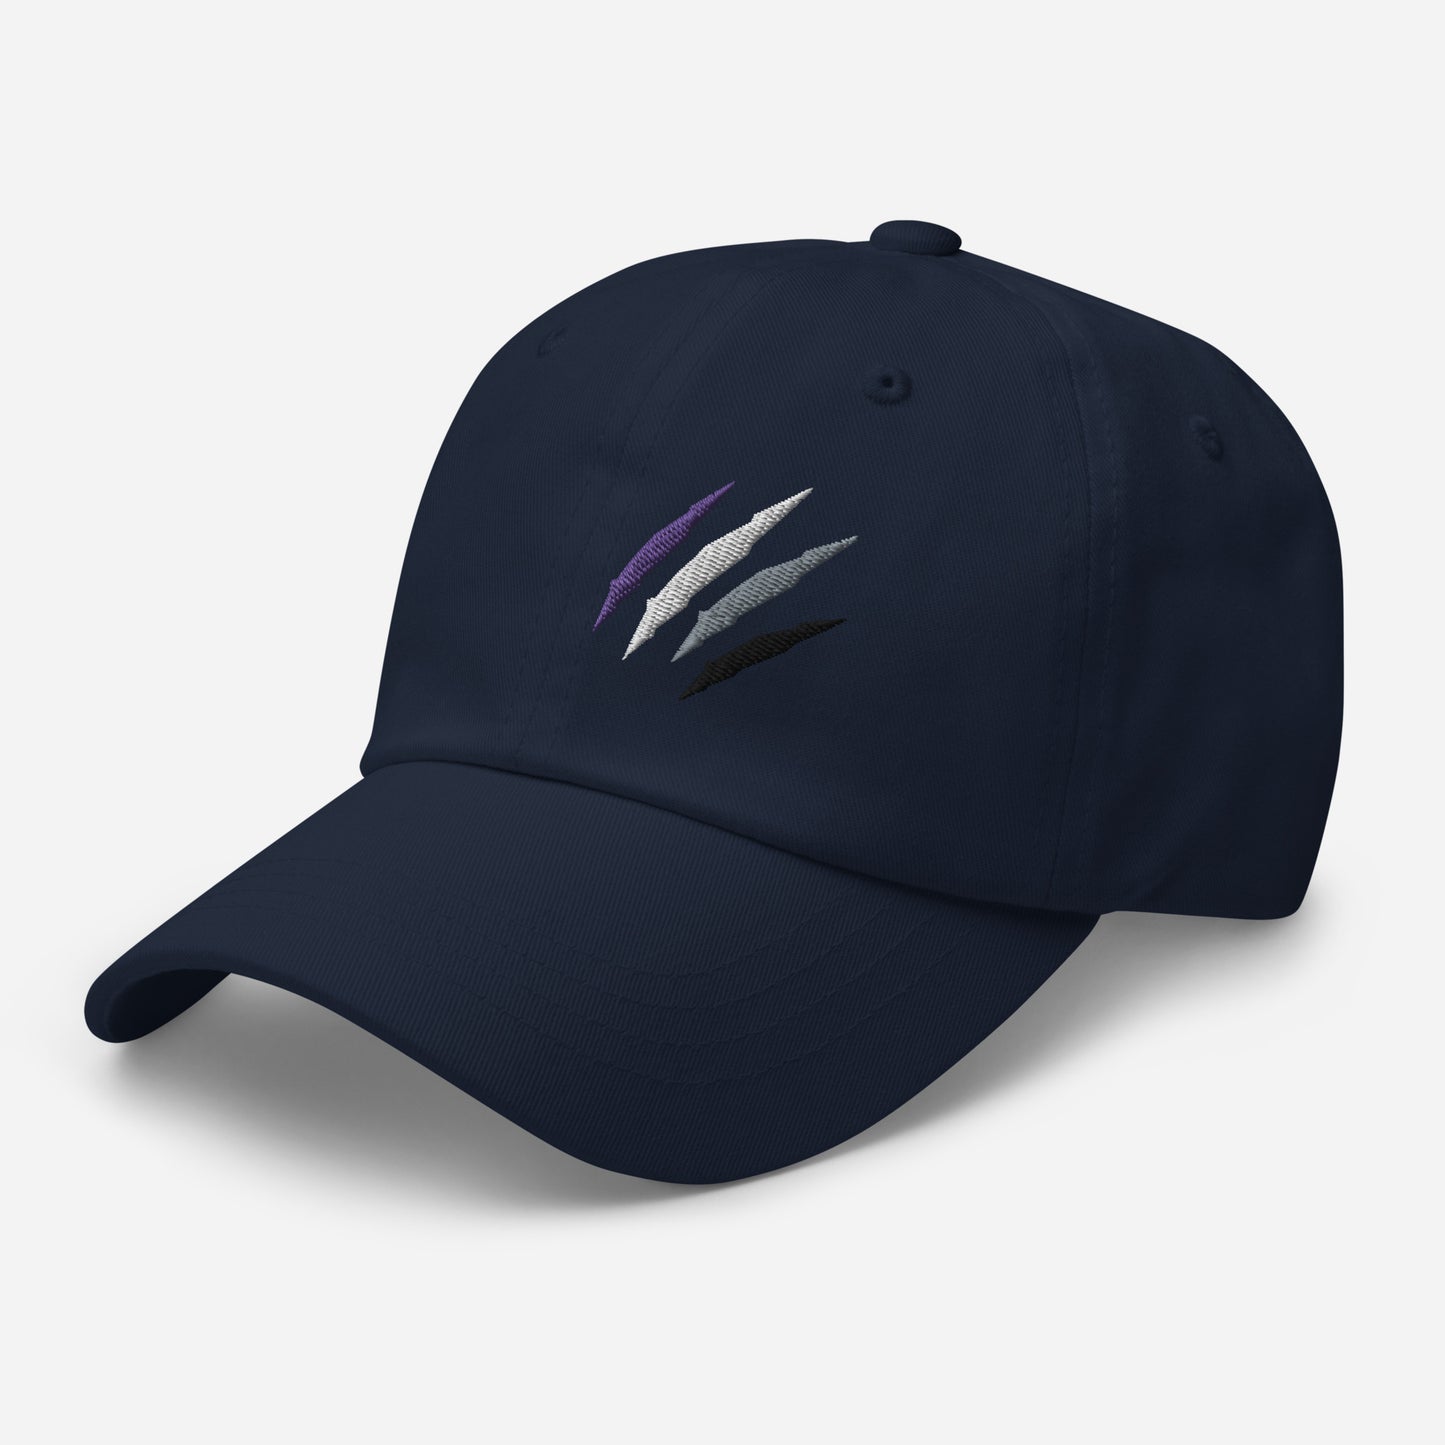 Baseball hat featuring asexual pride scratch mark embroidery in navy with a low profile, adjustable strap.